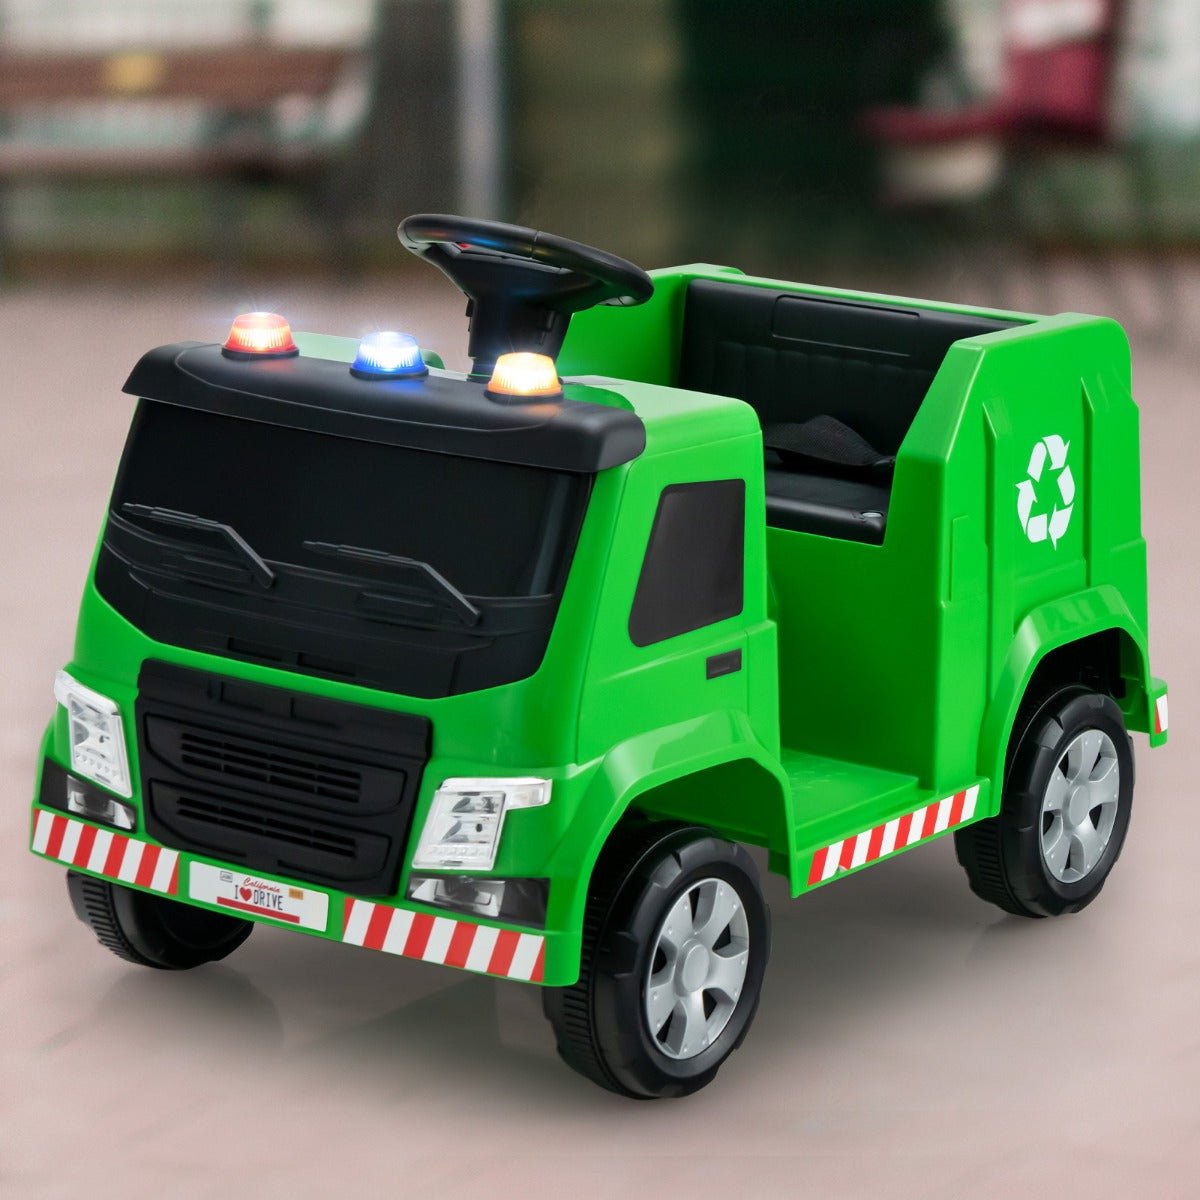 Imaginative Play: 12V Kids Garbage Truck Ride-On Toy, Green Delight